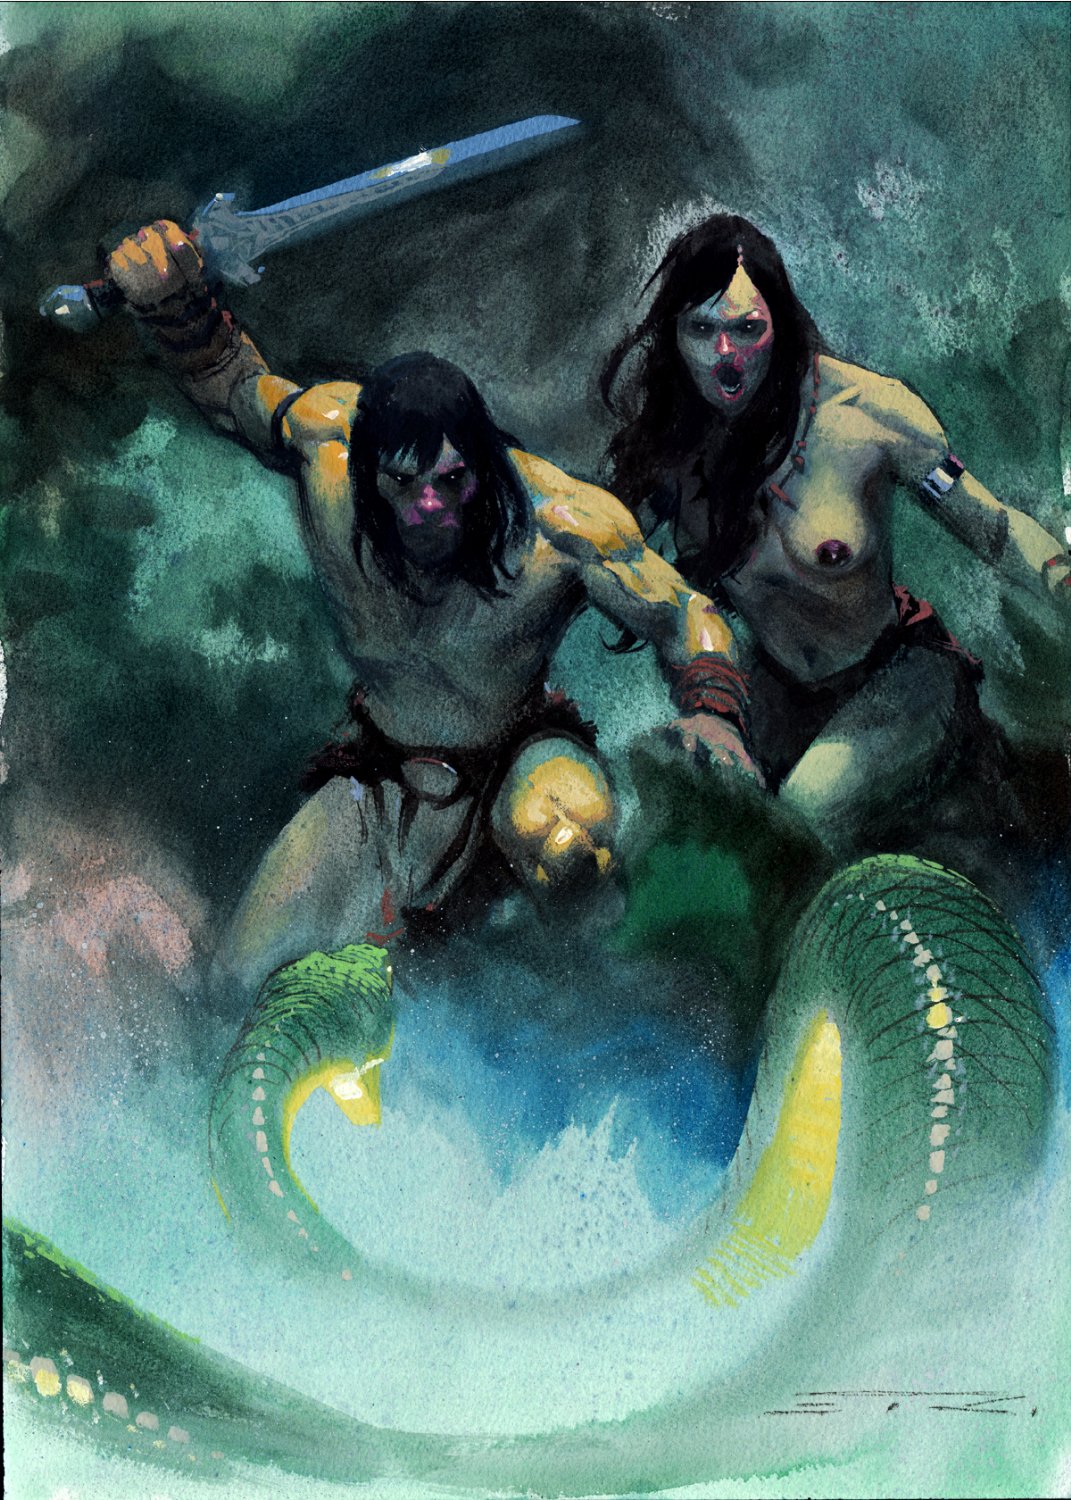 Vintage Cartoon Babe Nude - Conan & Naked Babe Warrior Large Painting (OVER 21 YRS OLD TO VIEW!) Comic  Art For Sale By Artist Esad Ribic at Romitaman.com